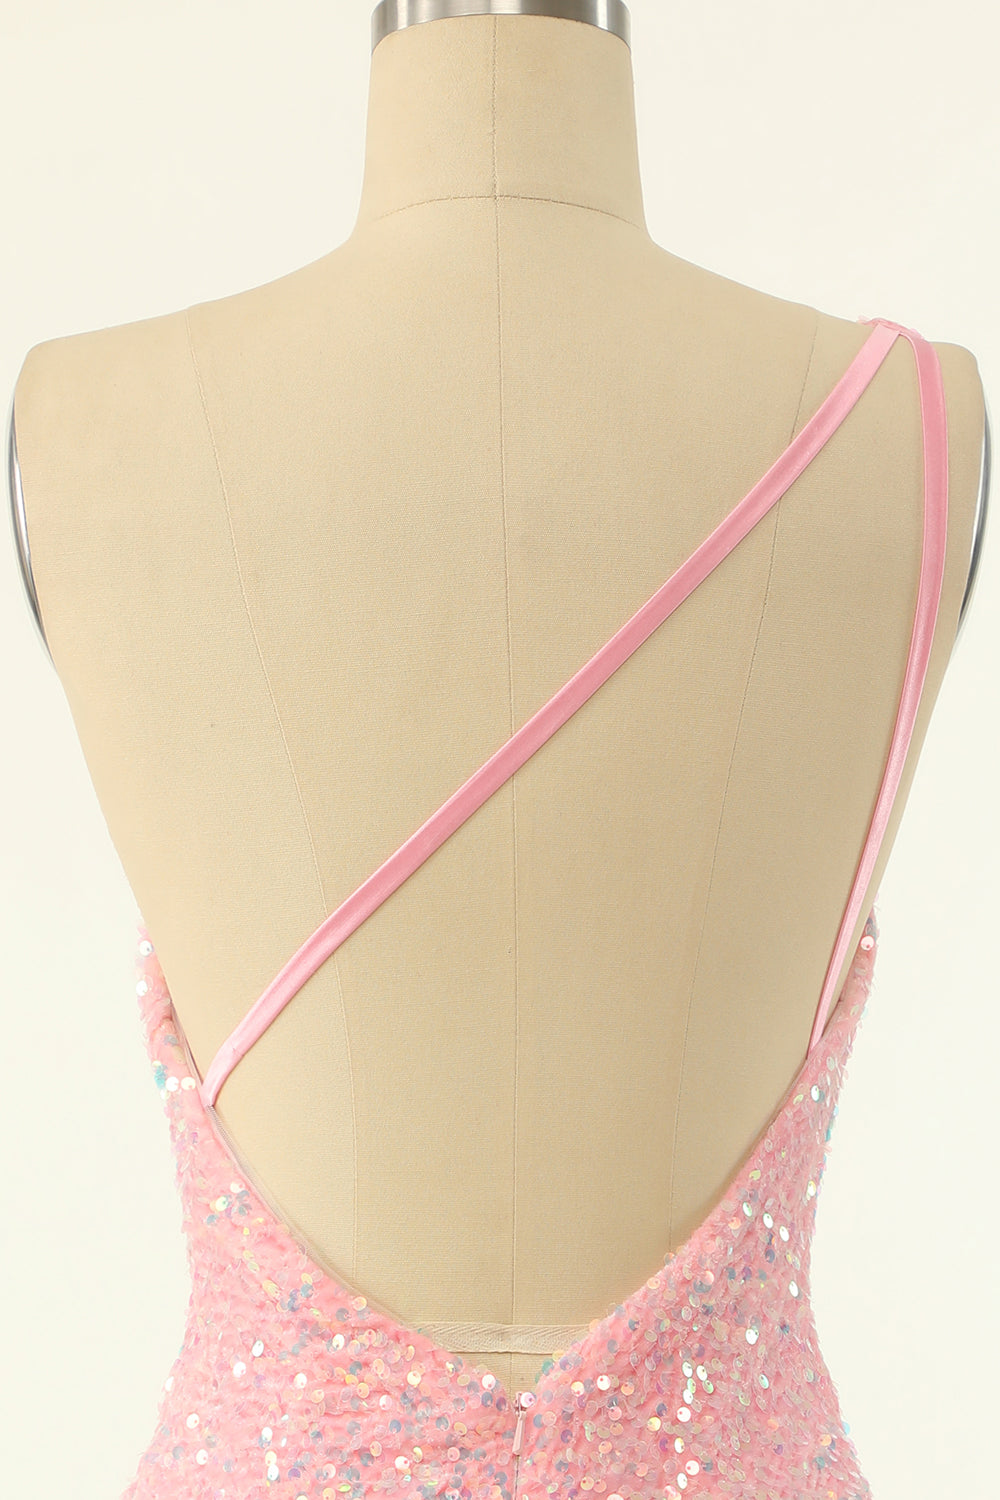 Pink One Shoulder Sequins Tight Homecoming Dress